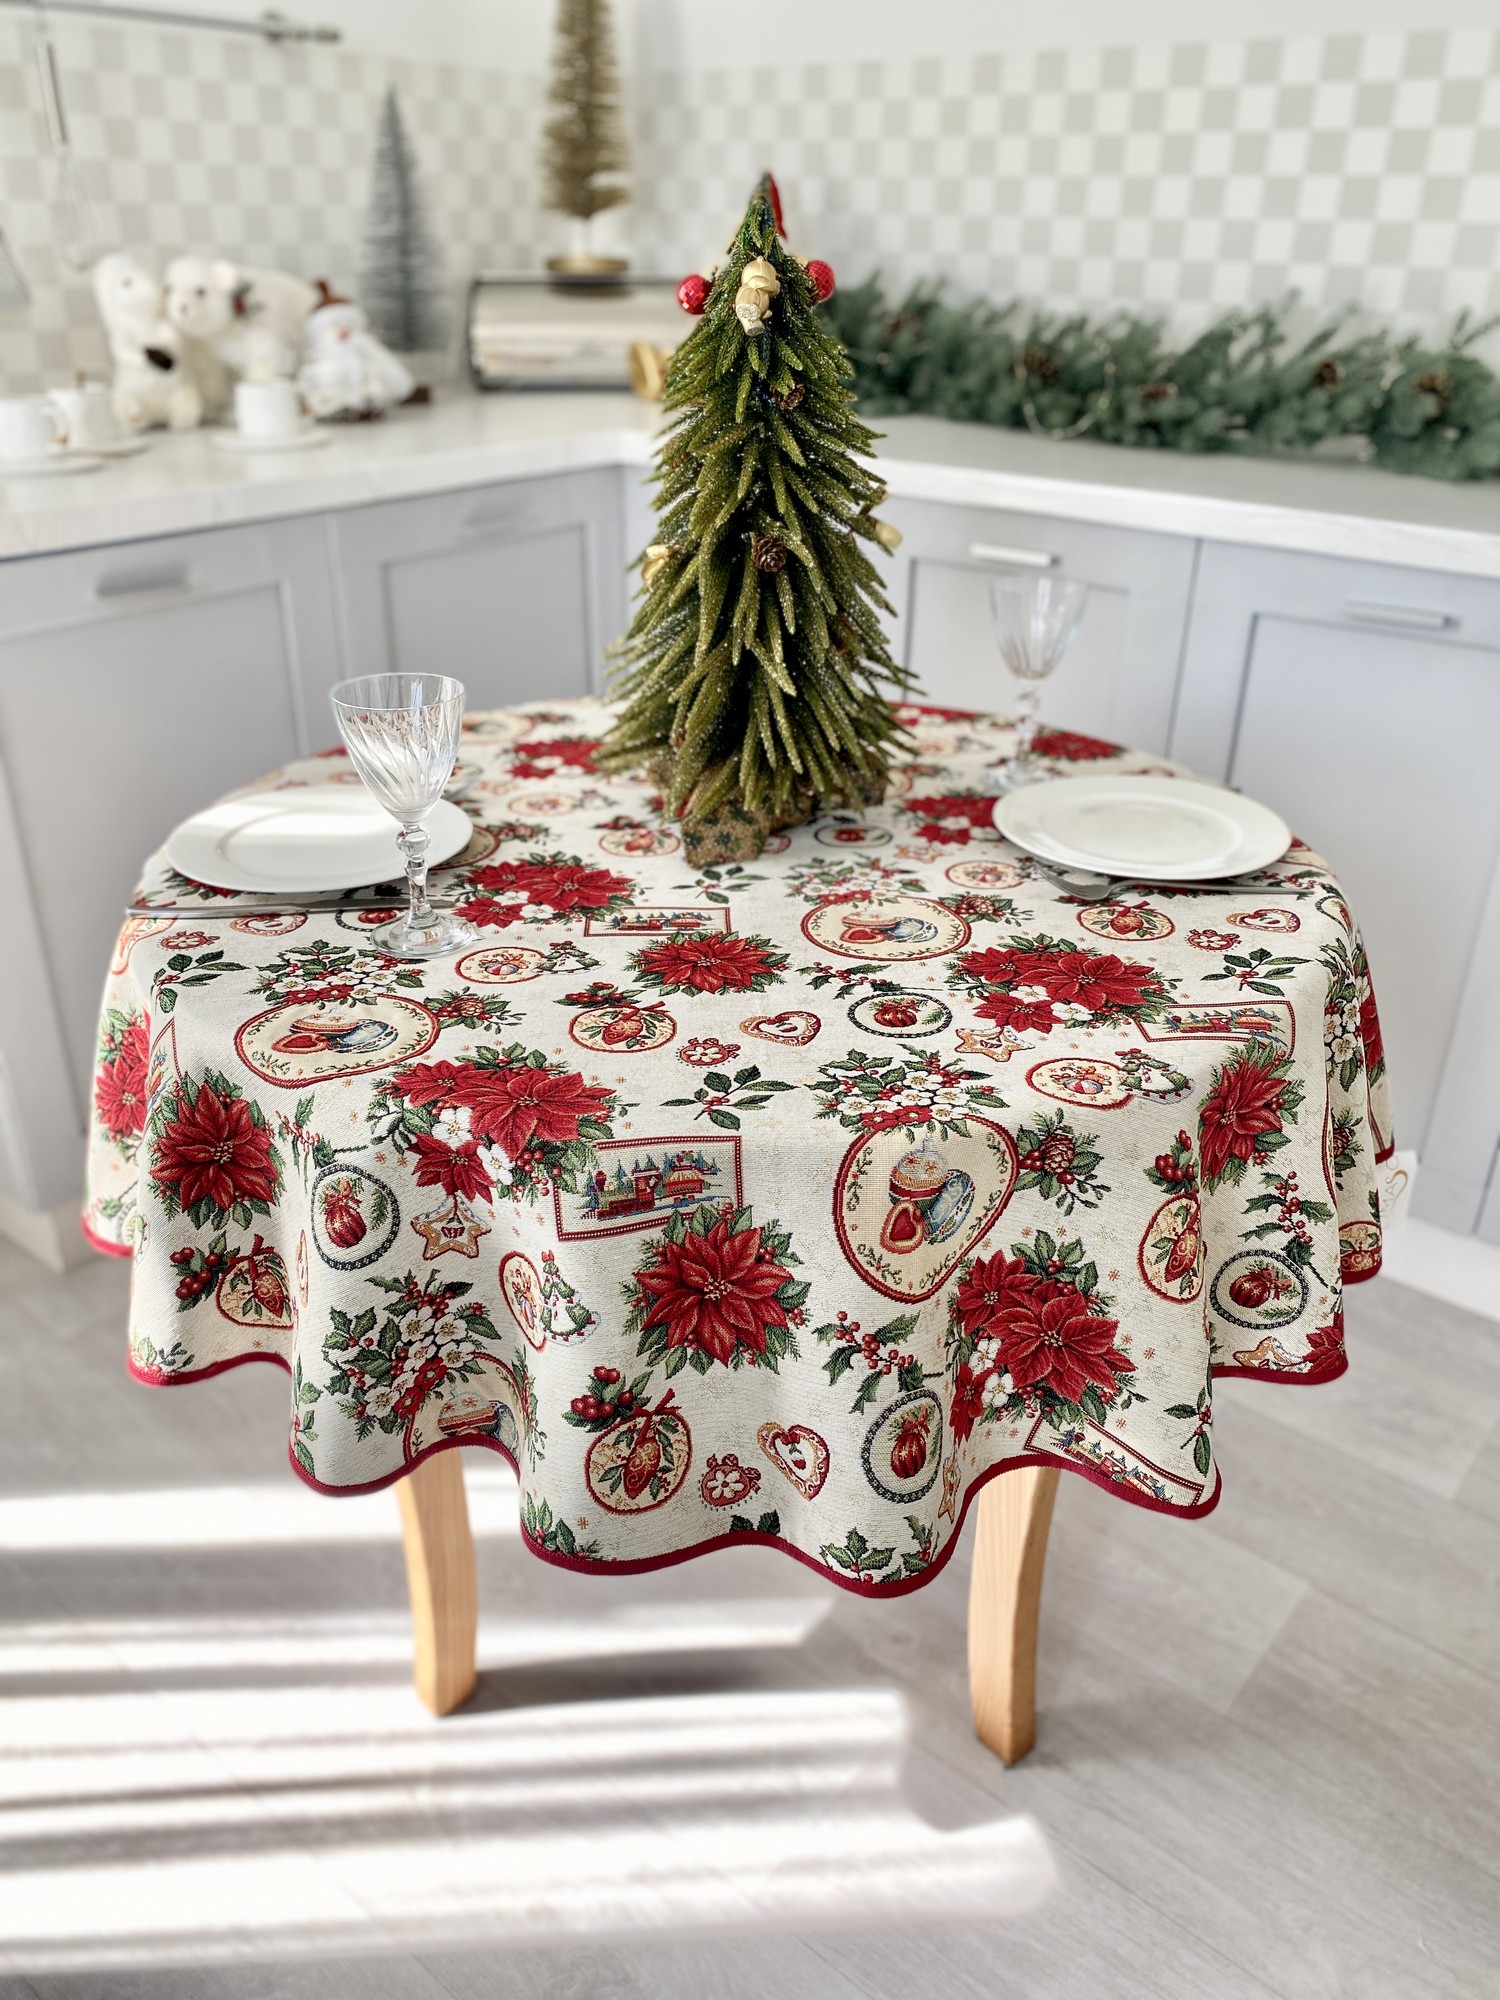 Christmas tapestry tablecloth for round table ø200 cm (78 in), with gold lurex round festive tablecloth